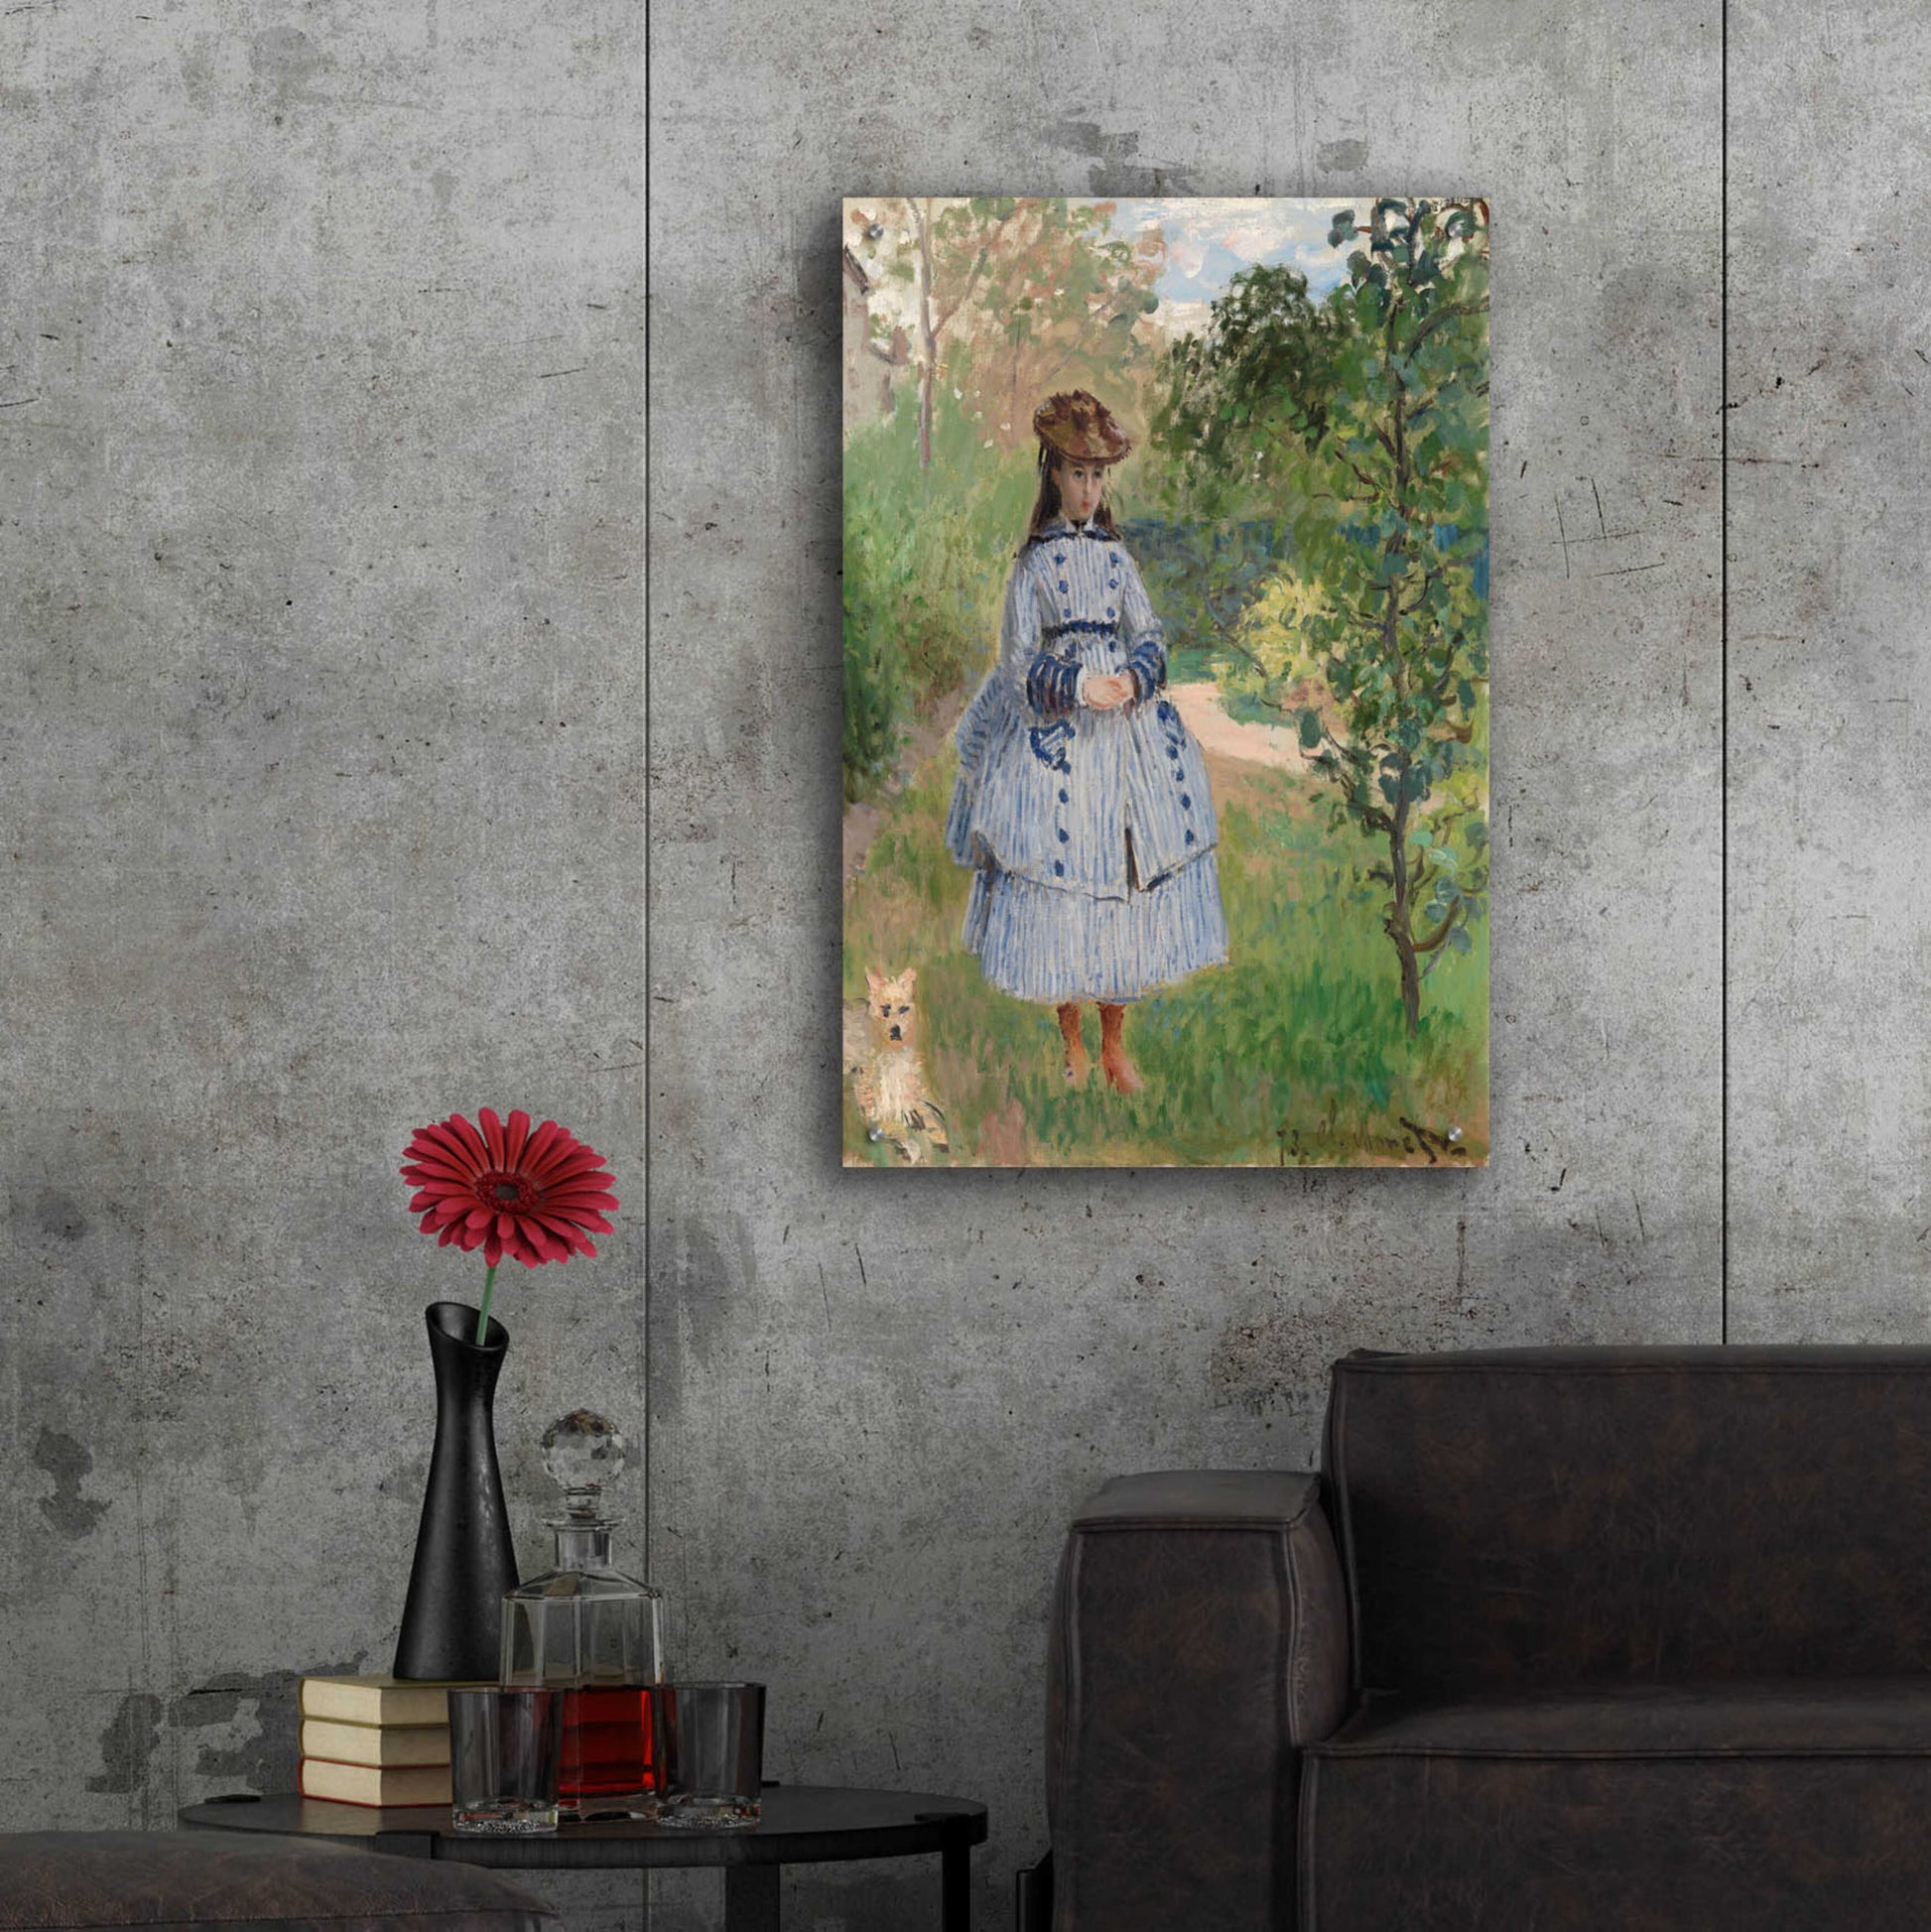 Epic Art 'Girl With Dog' by Claude Monet, Acrylic Glass Wall Art,24x36